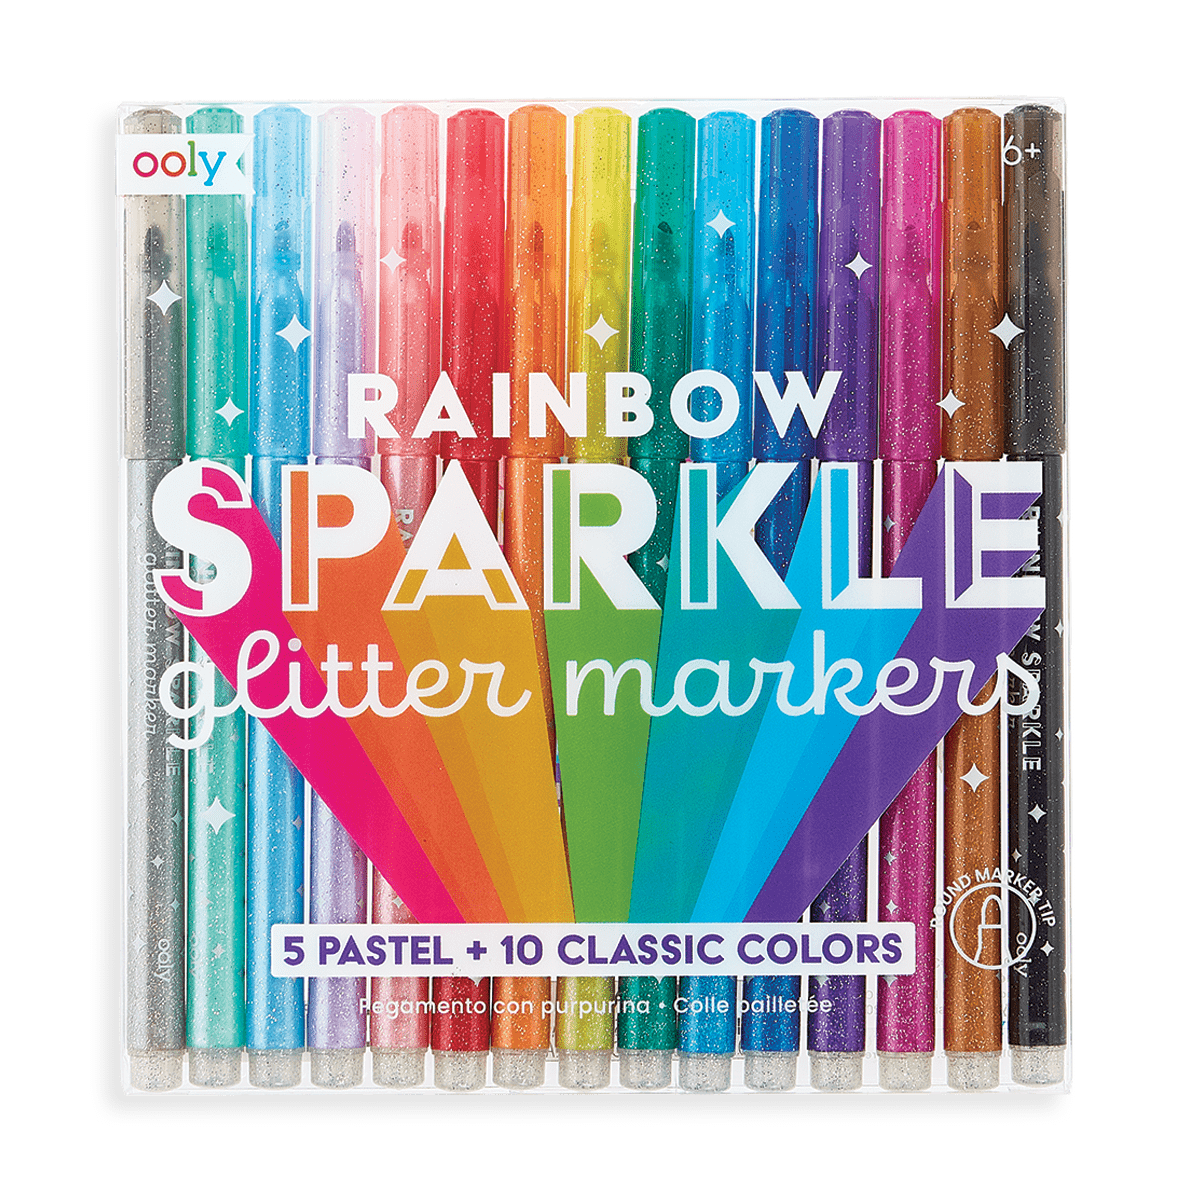 ooly rainbow sparkle watercolor gel crayons - Little